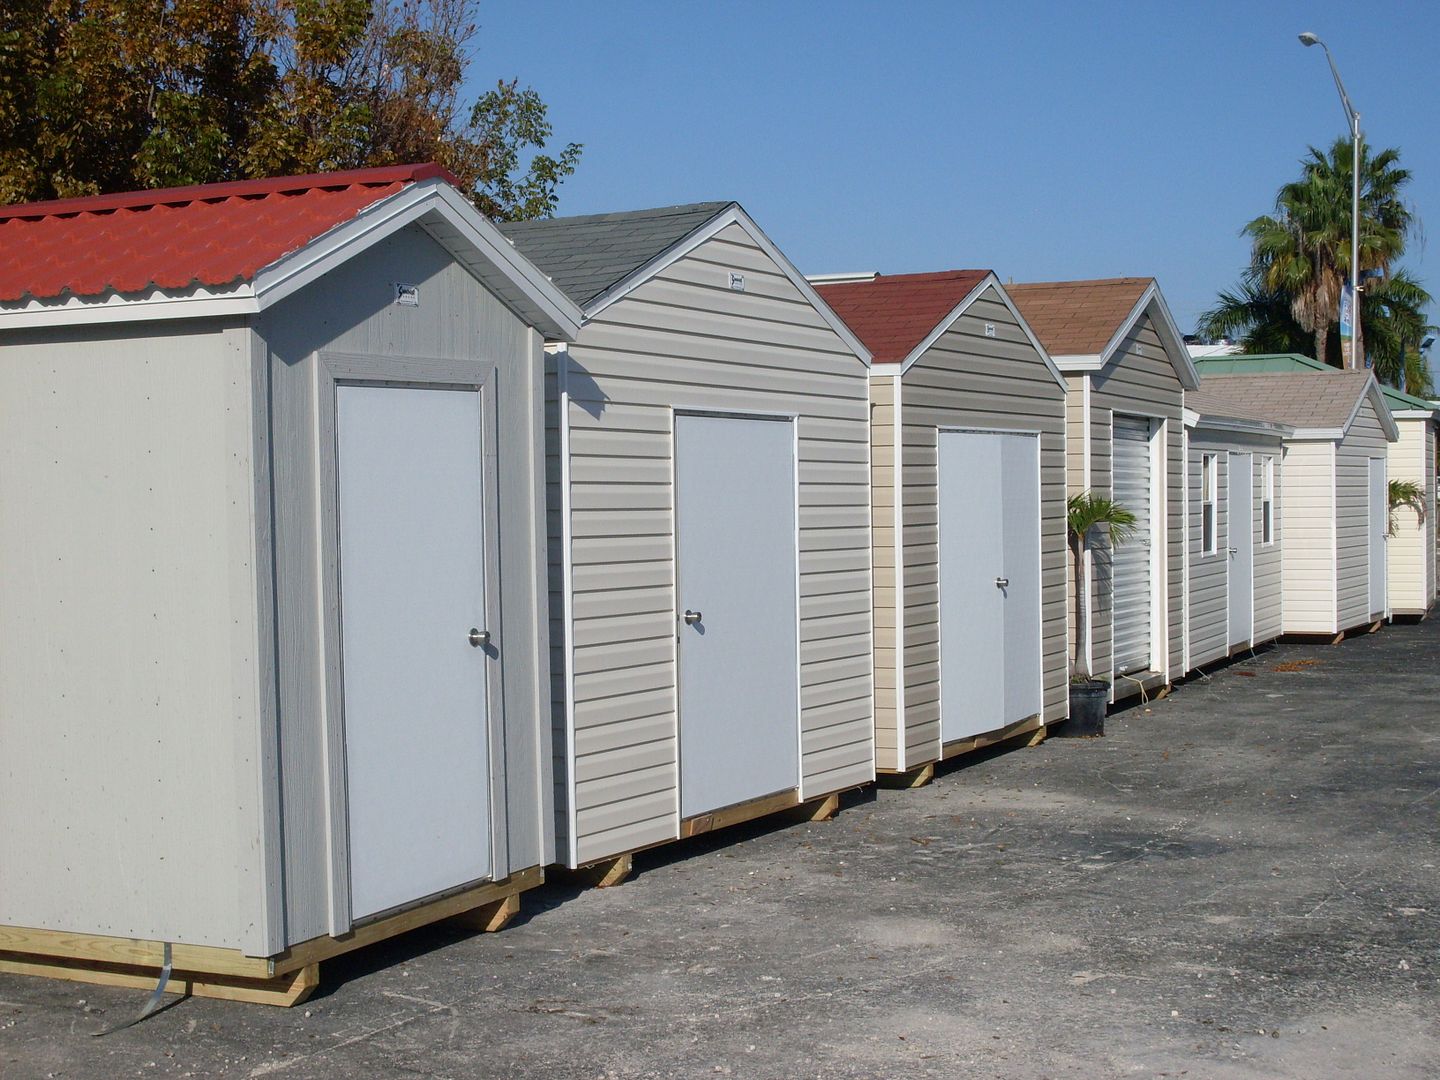 Sale on sheds South florida approved, Dade county approved, Broward 